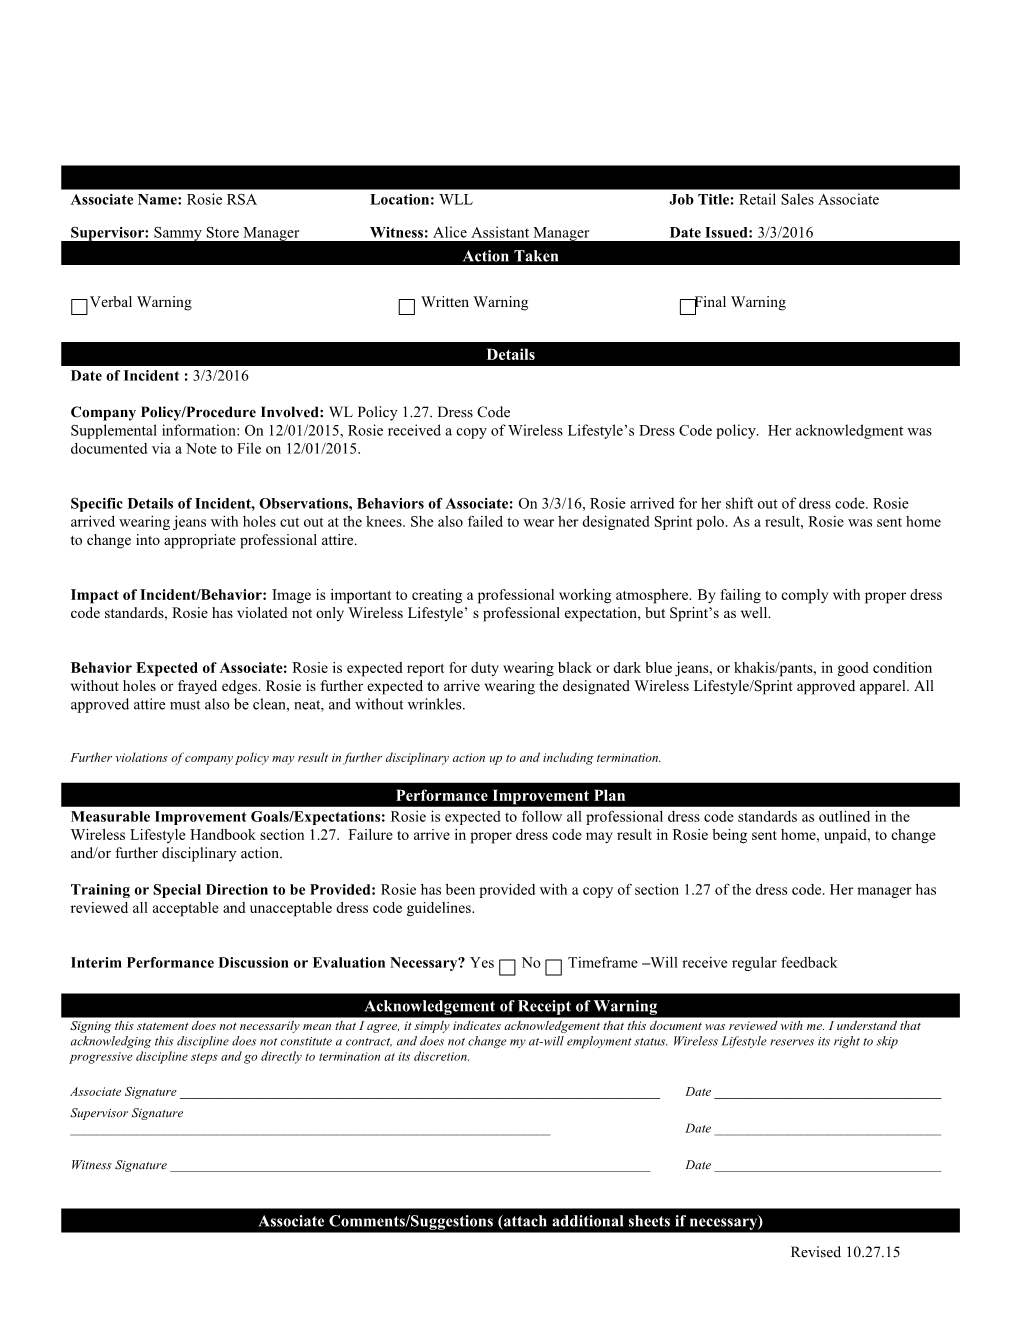 Associate Comments/Suggestions (Attach Additional Sheets If Necessary)